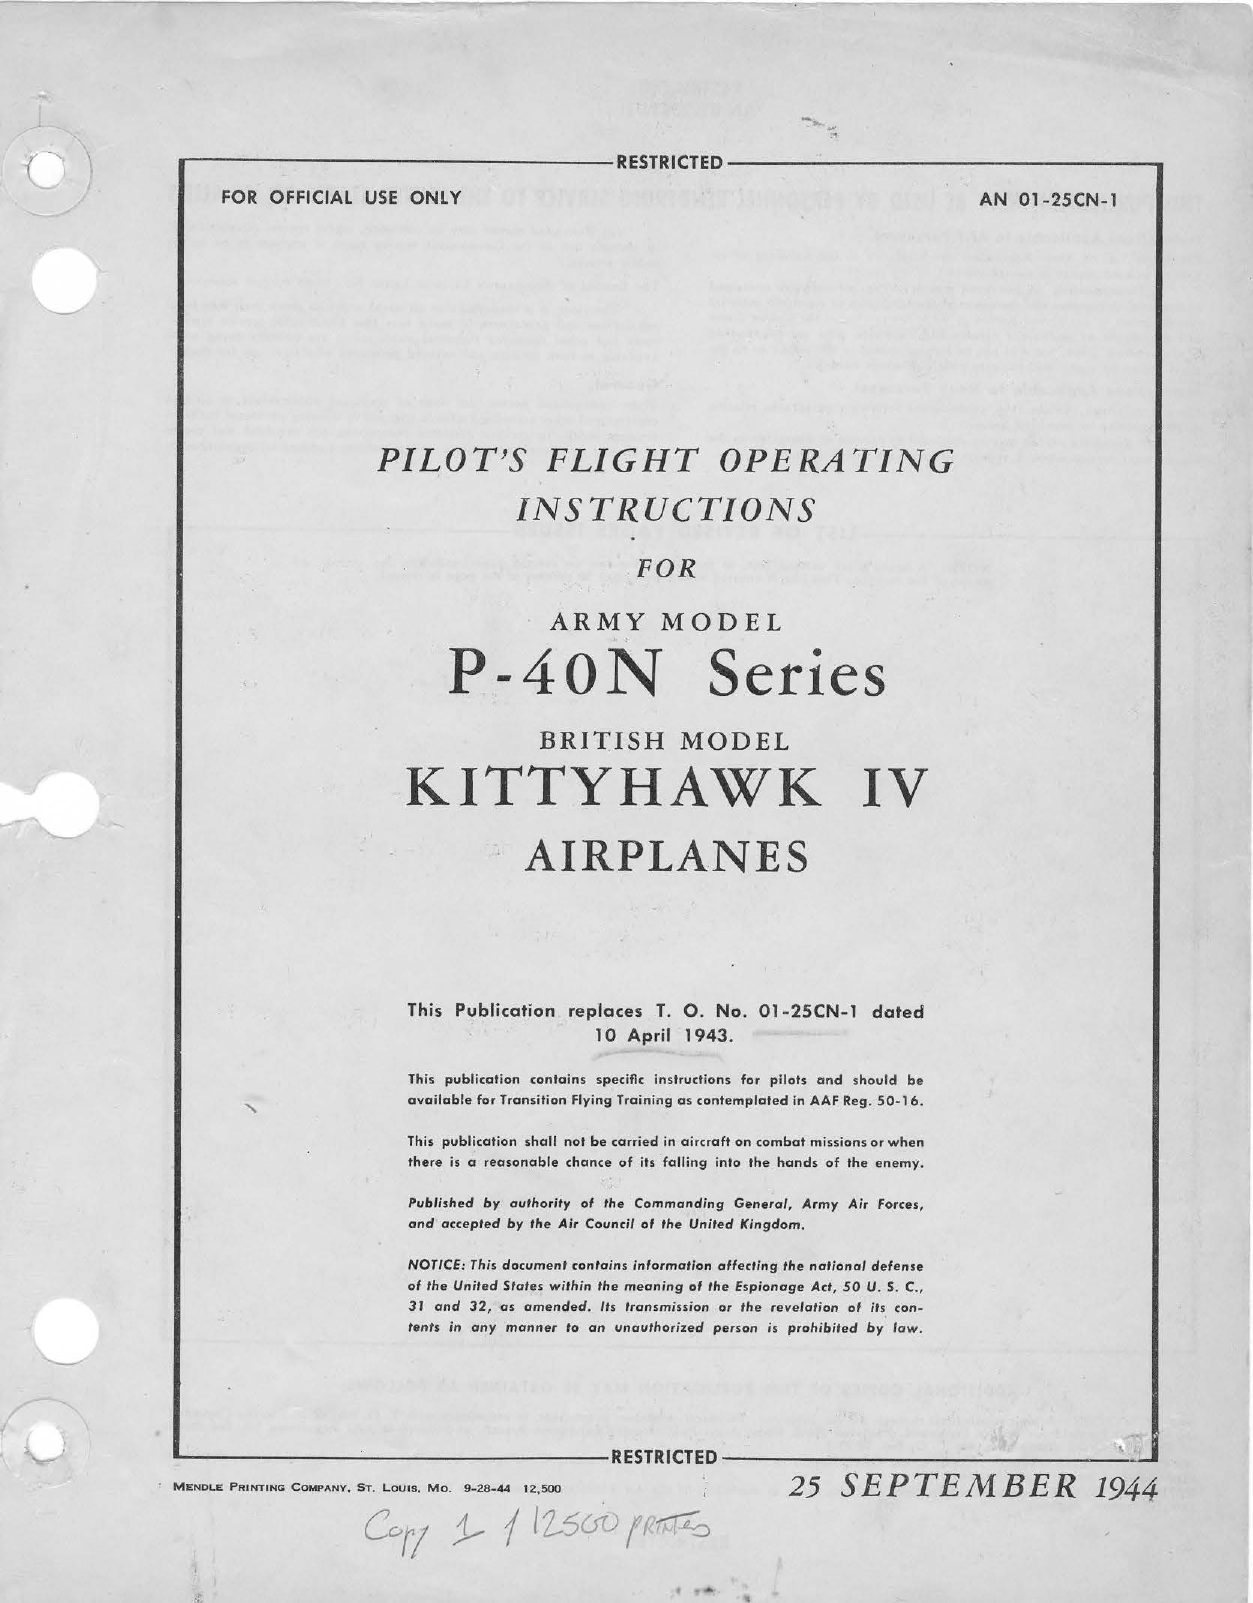 Sample page 1 from AirCorps Library document: Pilot's Flight Operating Instructions for P-40N Series - Kittyhawk IV